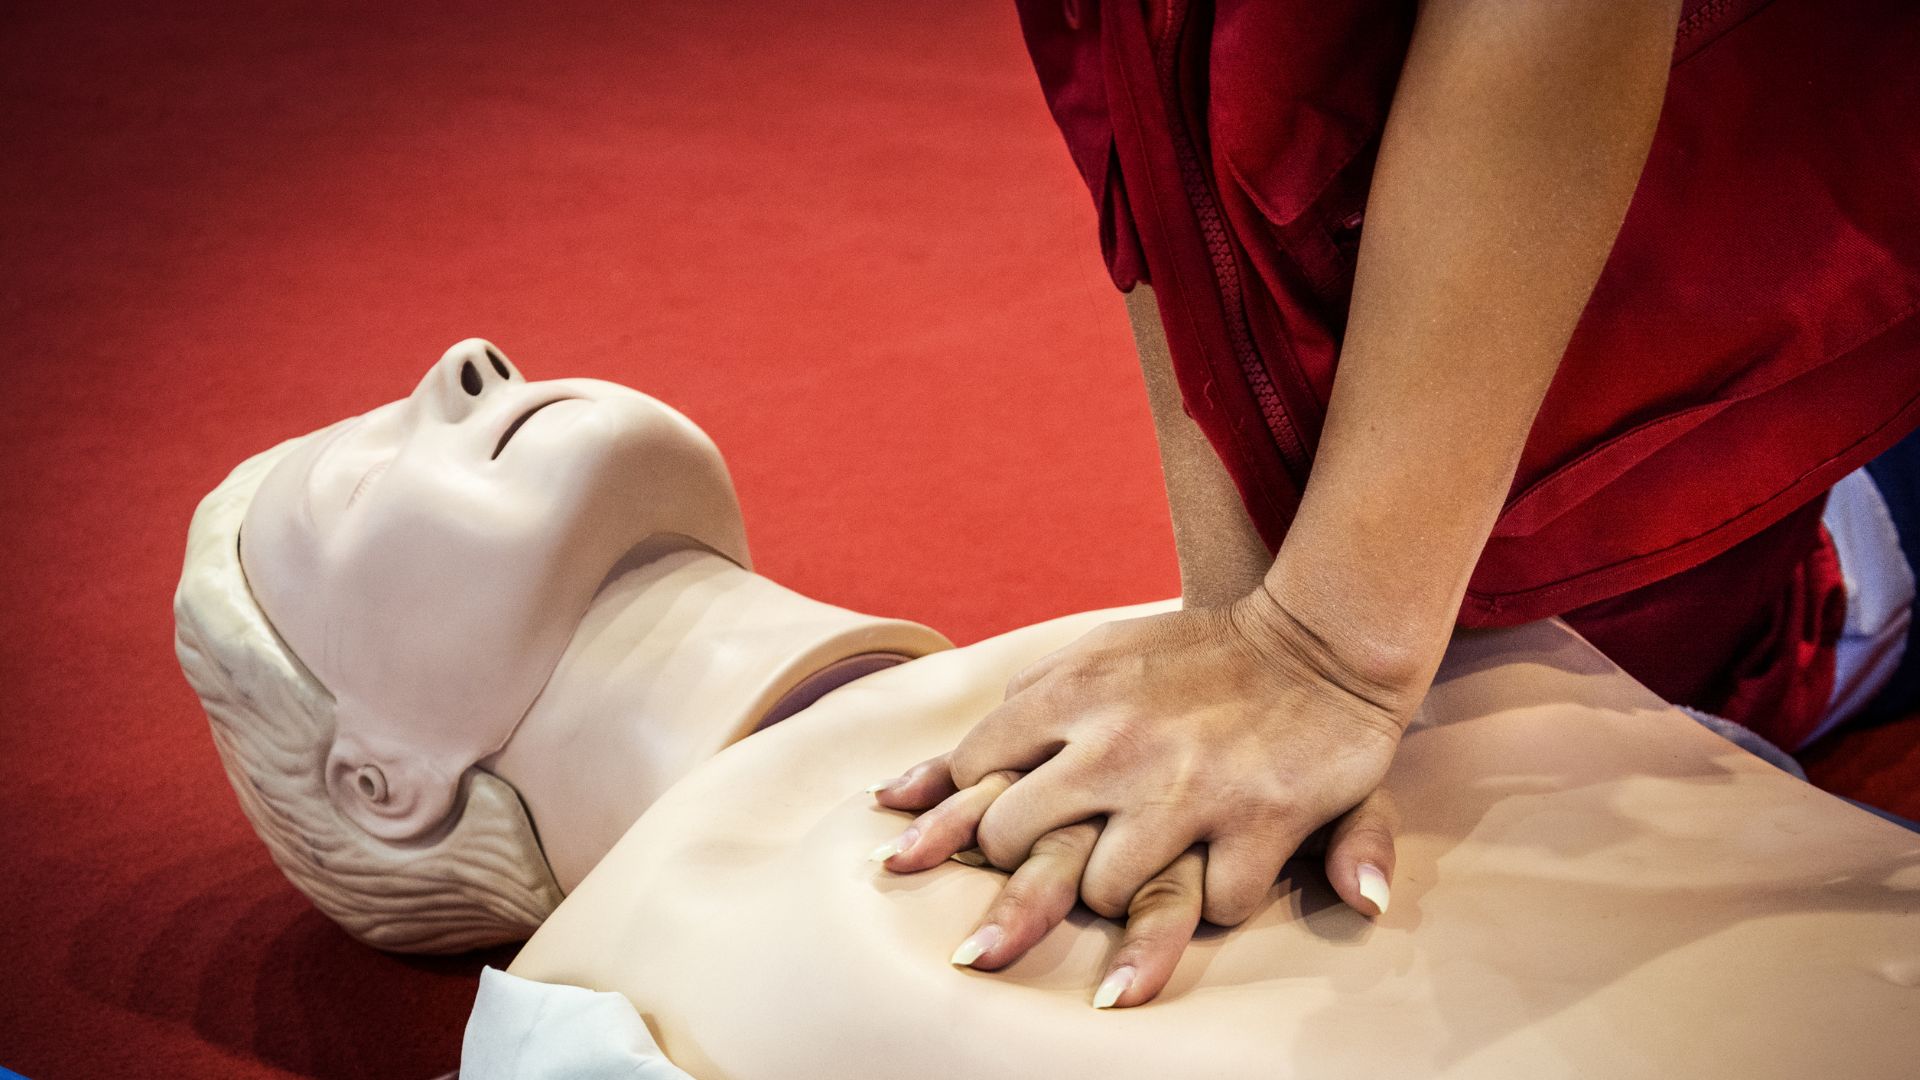 CPR and Heart Attack: Responding Quickly for Better Outcomes